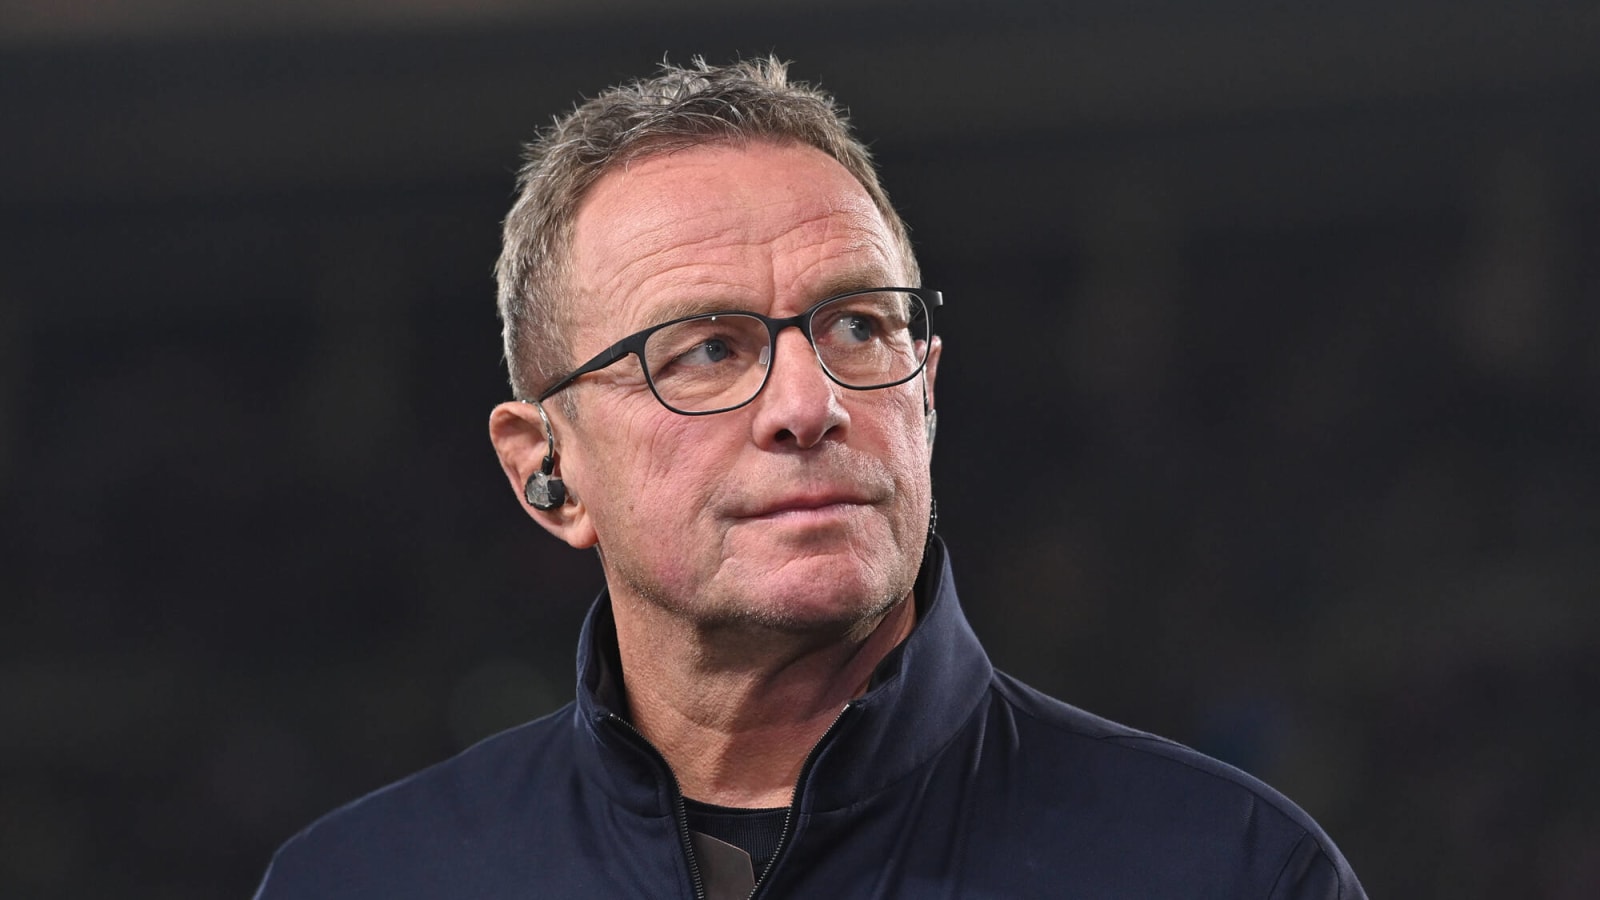 Ralf Rangnick plays down return to club football with sights on Euro 2024